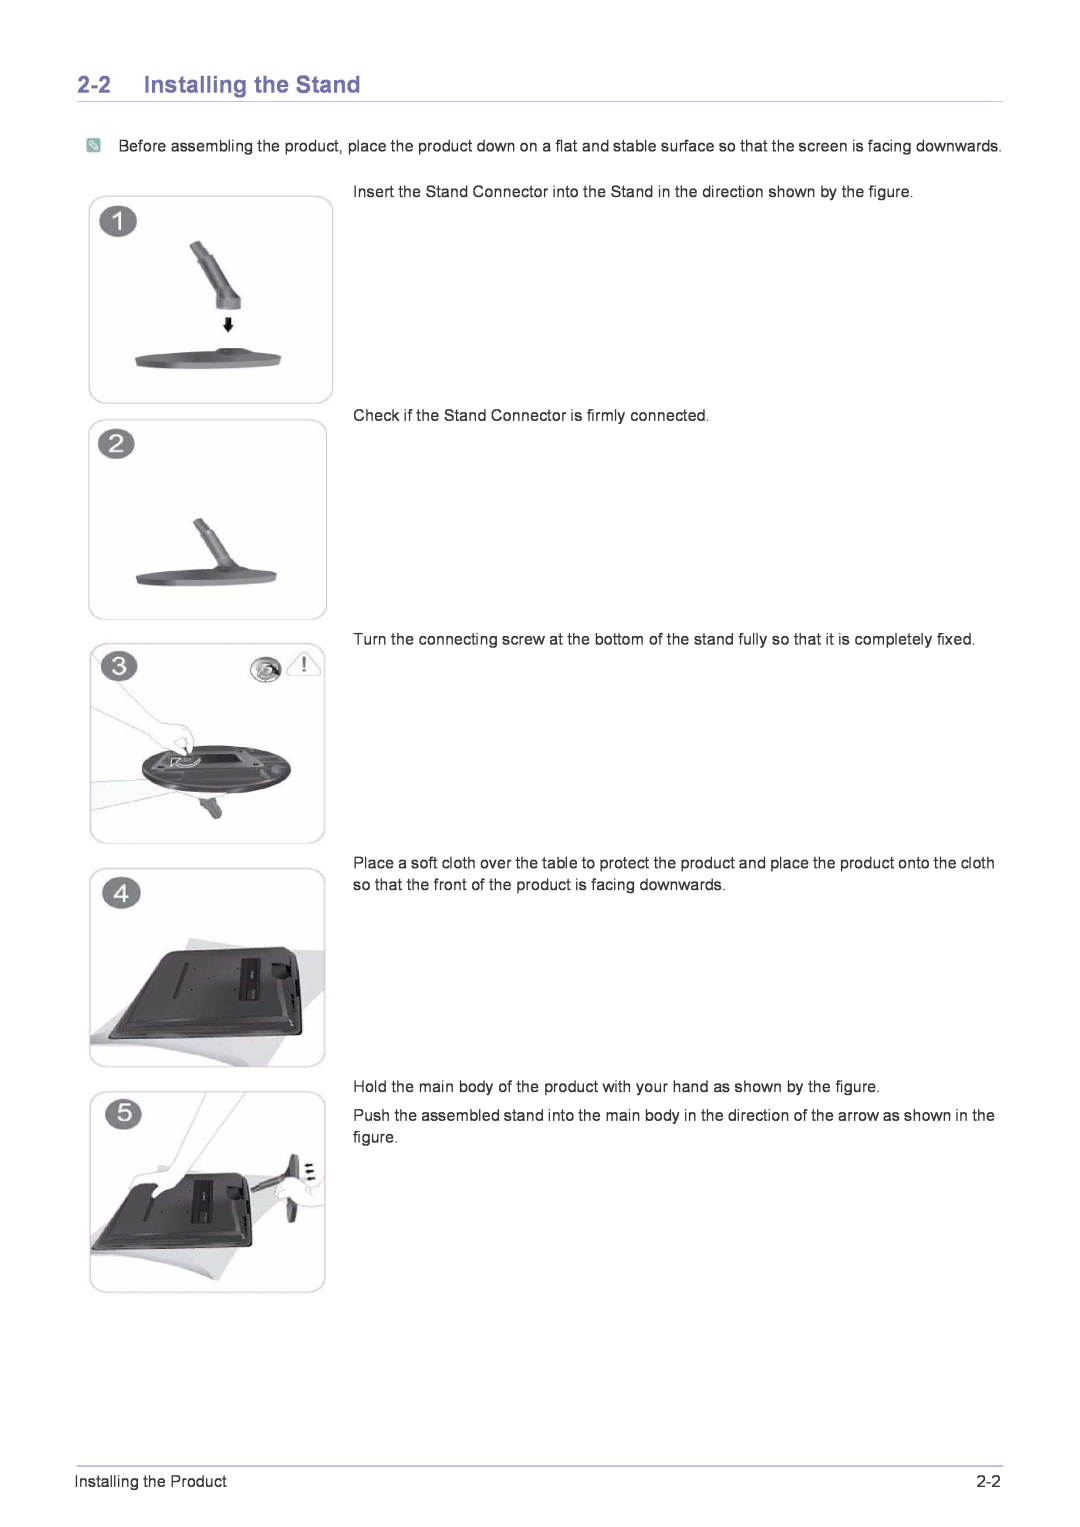 Samsung B1930NW, B2330, B2430L, B1730NW, B1630N, B2230W, B2230N, B2030N user manual Installing the Stand 